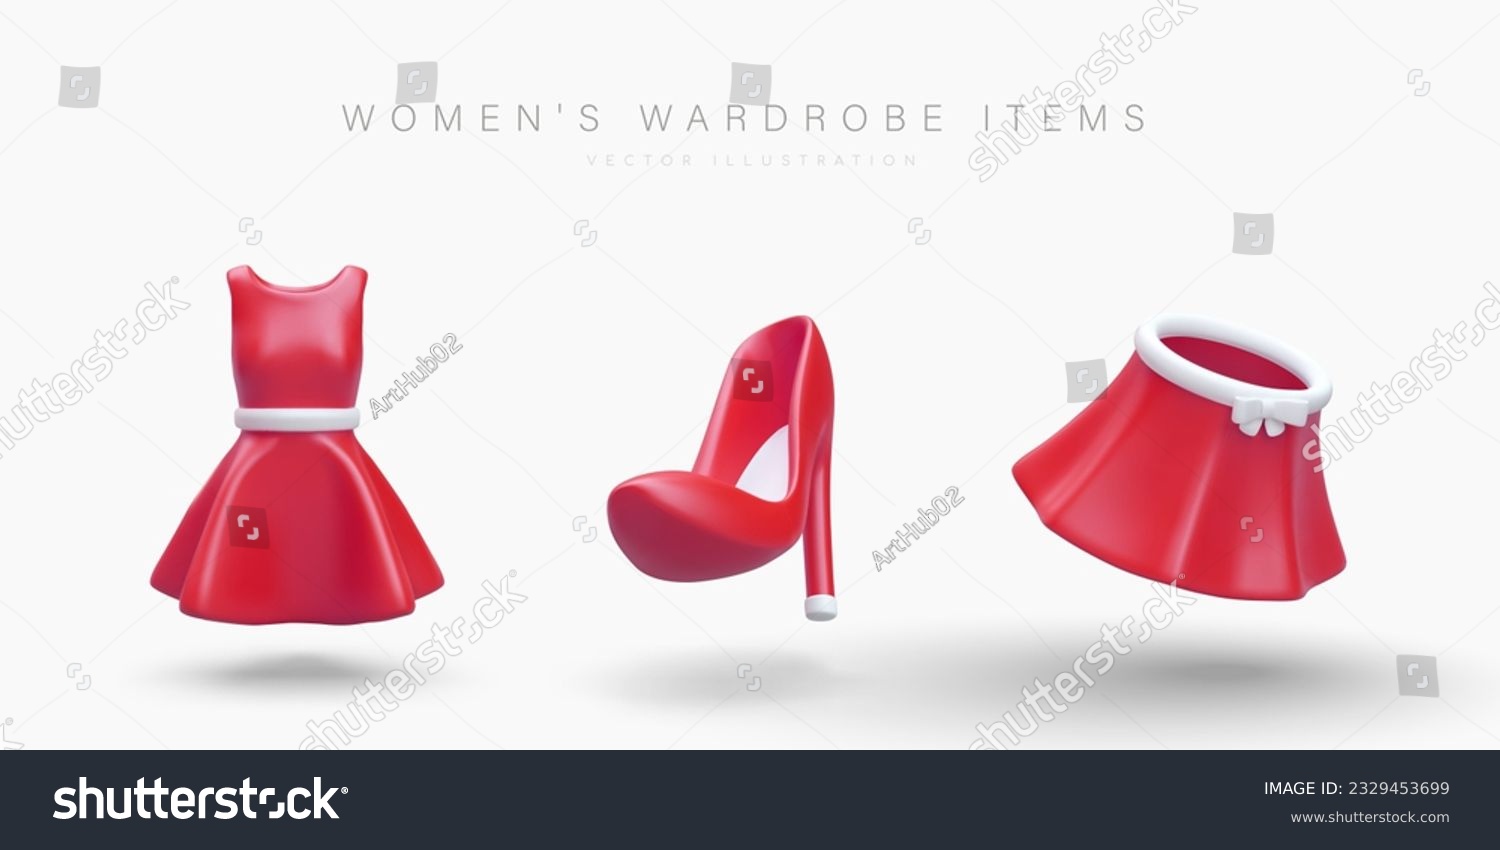 Womens wardrobe items. Realistic dress, skirt, high heel shoe. Colored icons to indicate product categories, sections in store. Cute illustration for modern design #2329453699